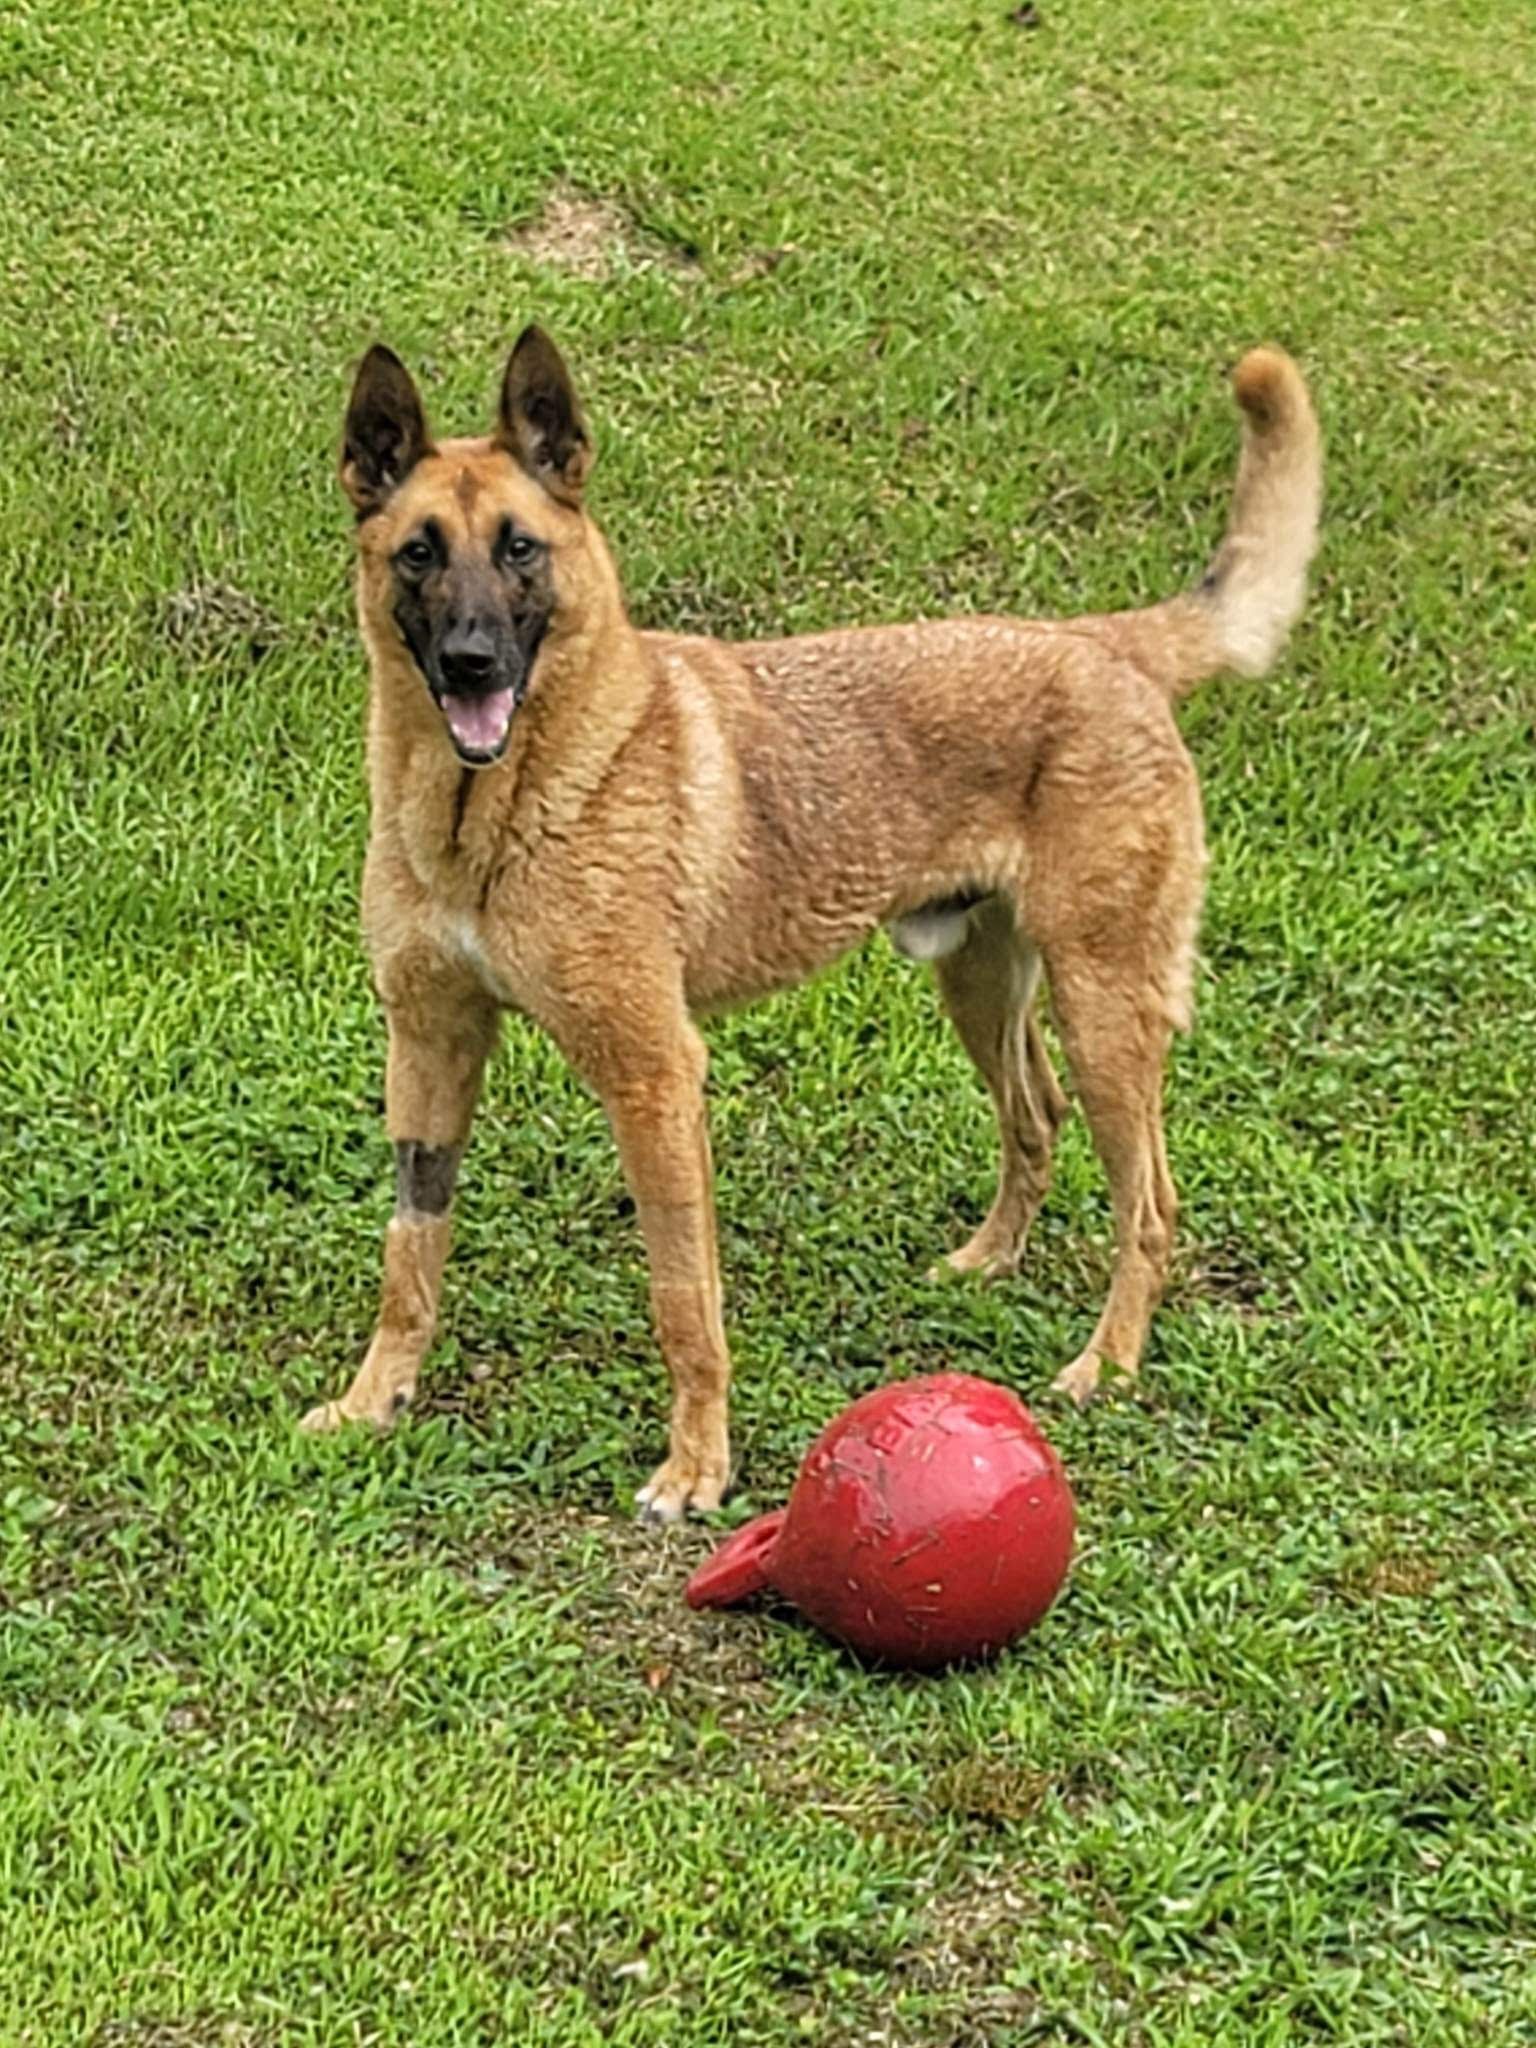 A brown dog is standing next to a red ball in the grass.